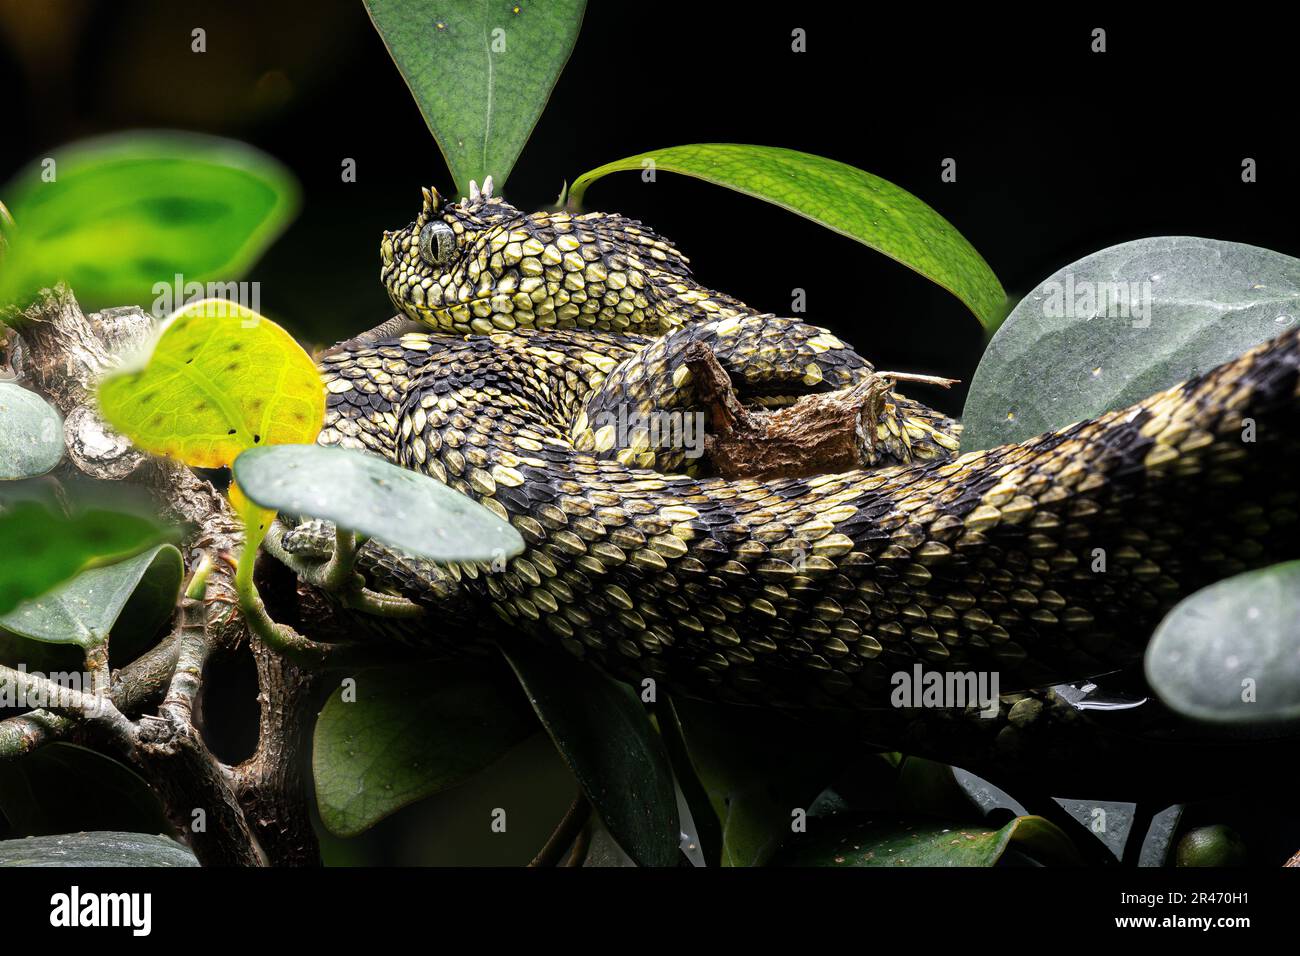 A Horned tree viper (Atheris ceratophora) on a tree branch Stock Photo